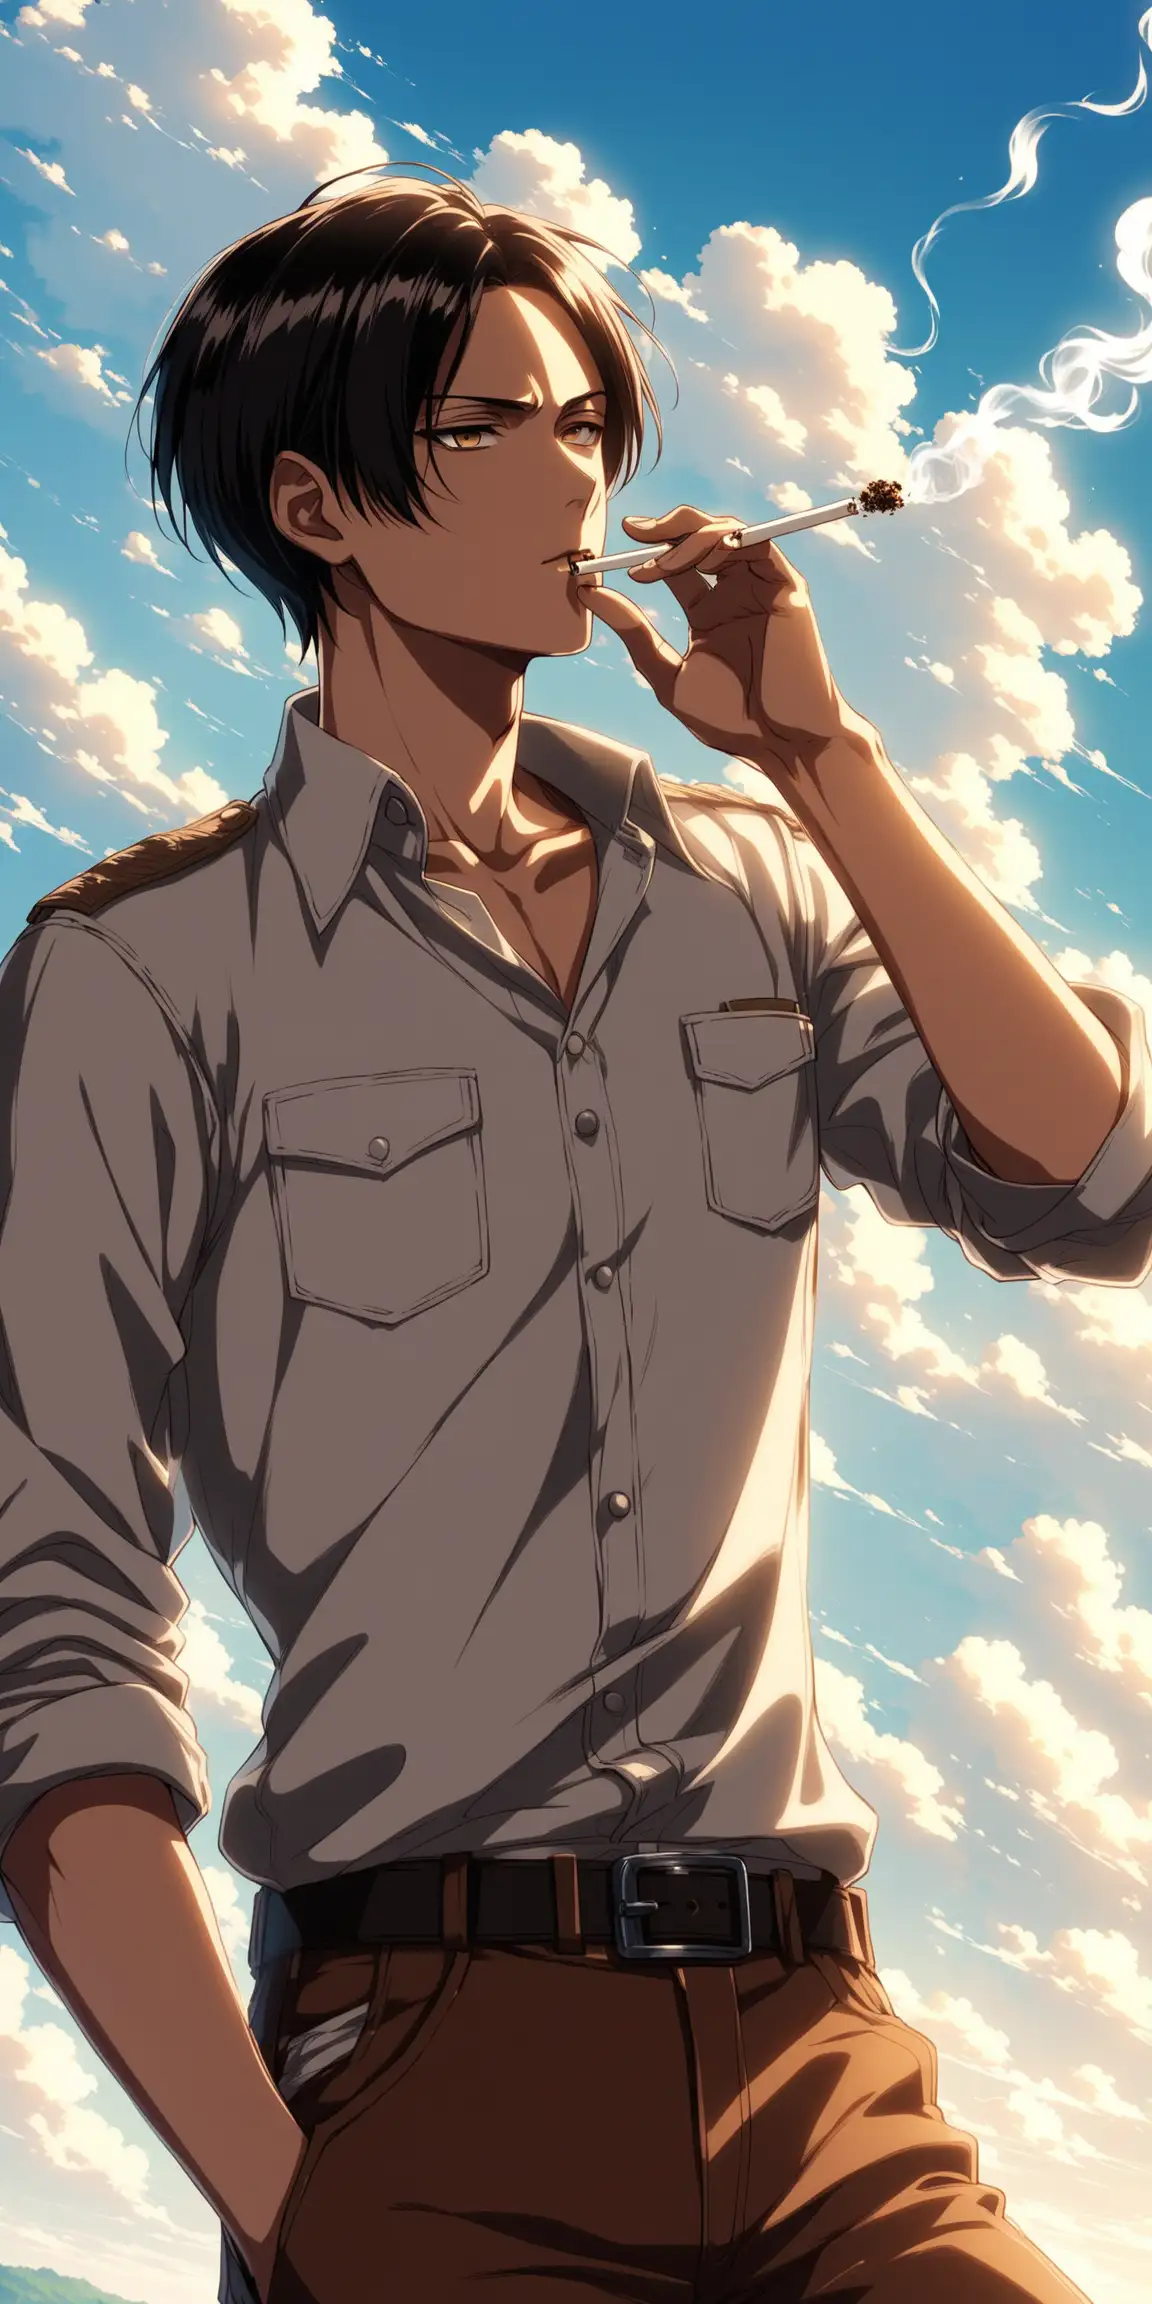 Levi from attack on titans ( he is smoking a joint) on a beautiful day 
